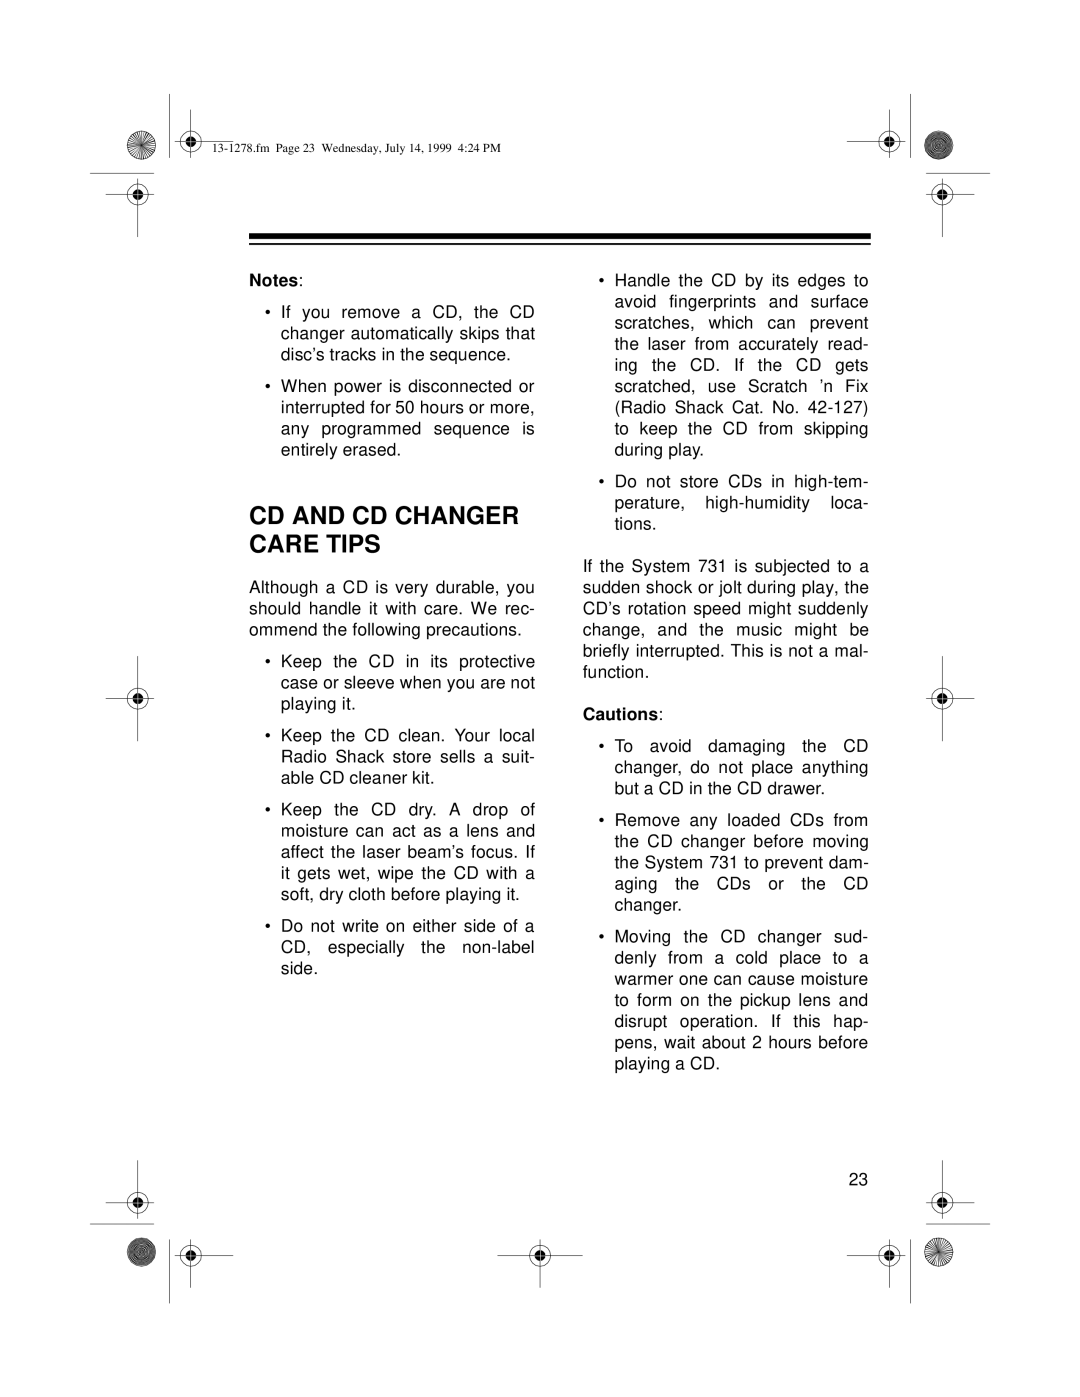 Optimus 731 owner manual Cd And Cd Changer Care Tips, Cautions 